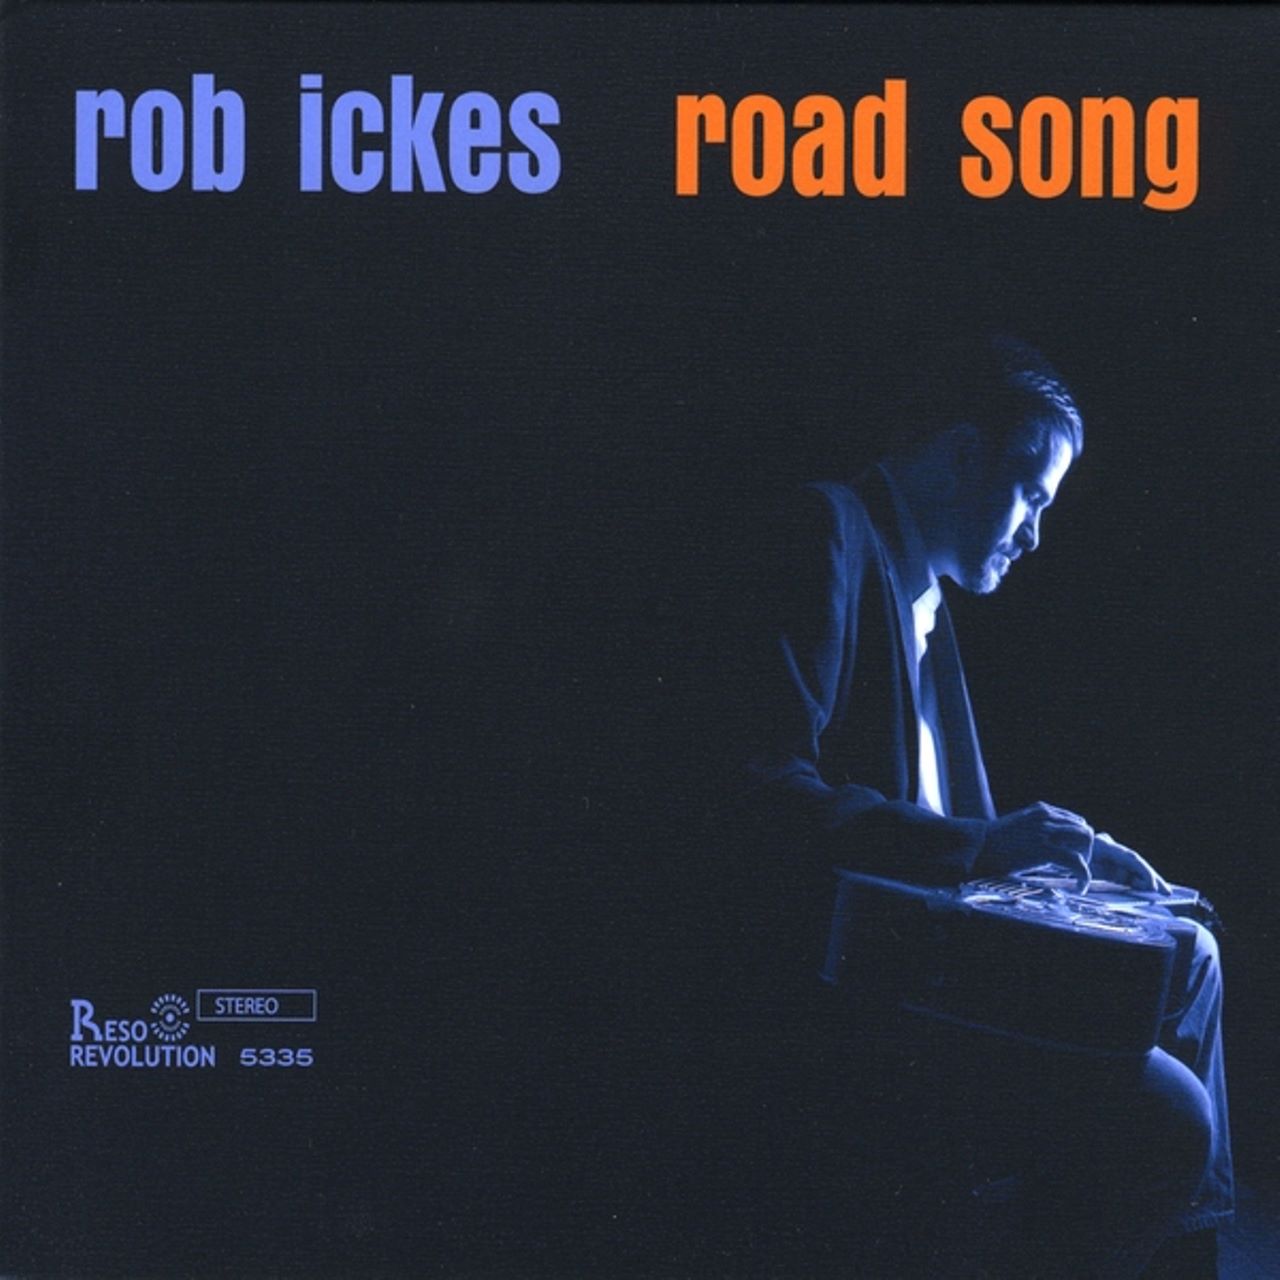 Rob Ickes - Road Song cover album